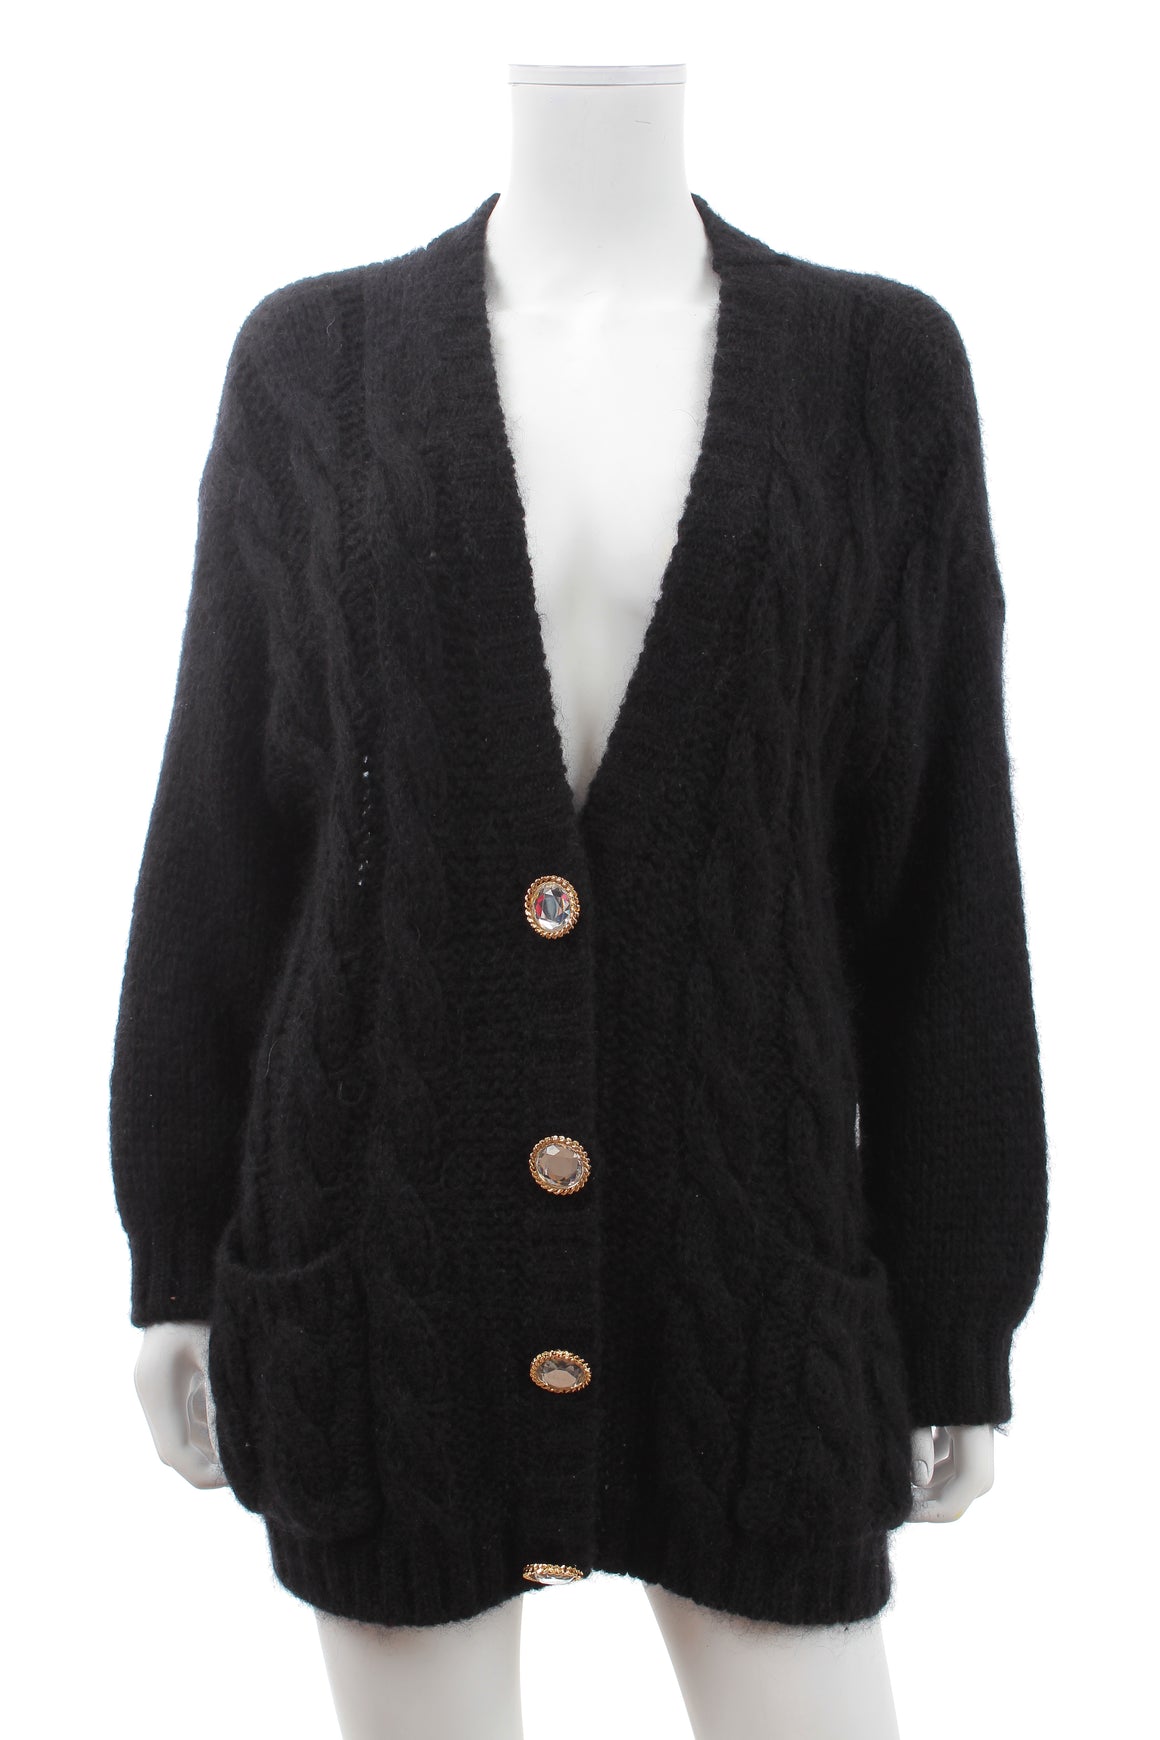 Alessandra Rich Crystal-Button Mohair-Blend Cable-Knit Cardigan